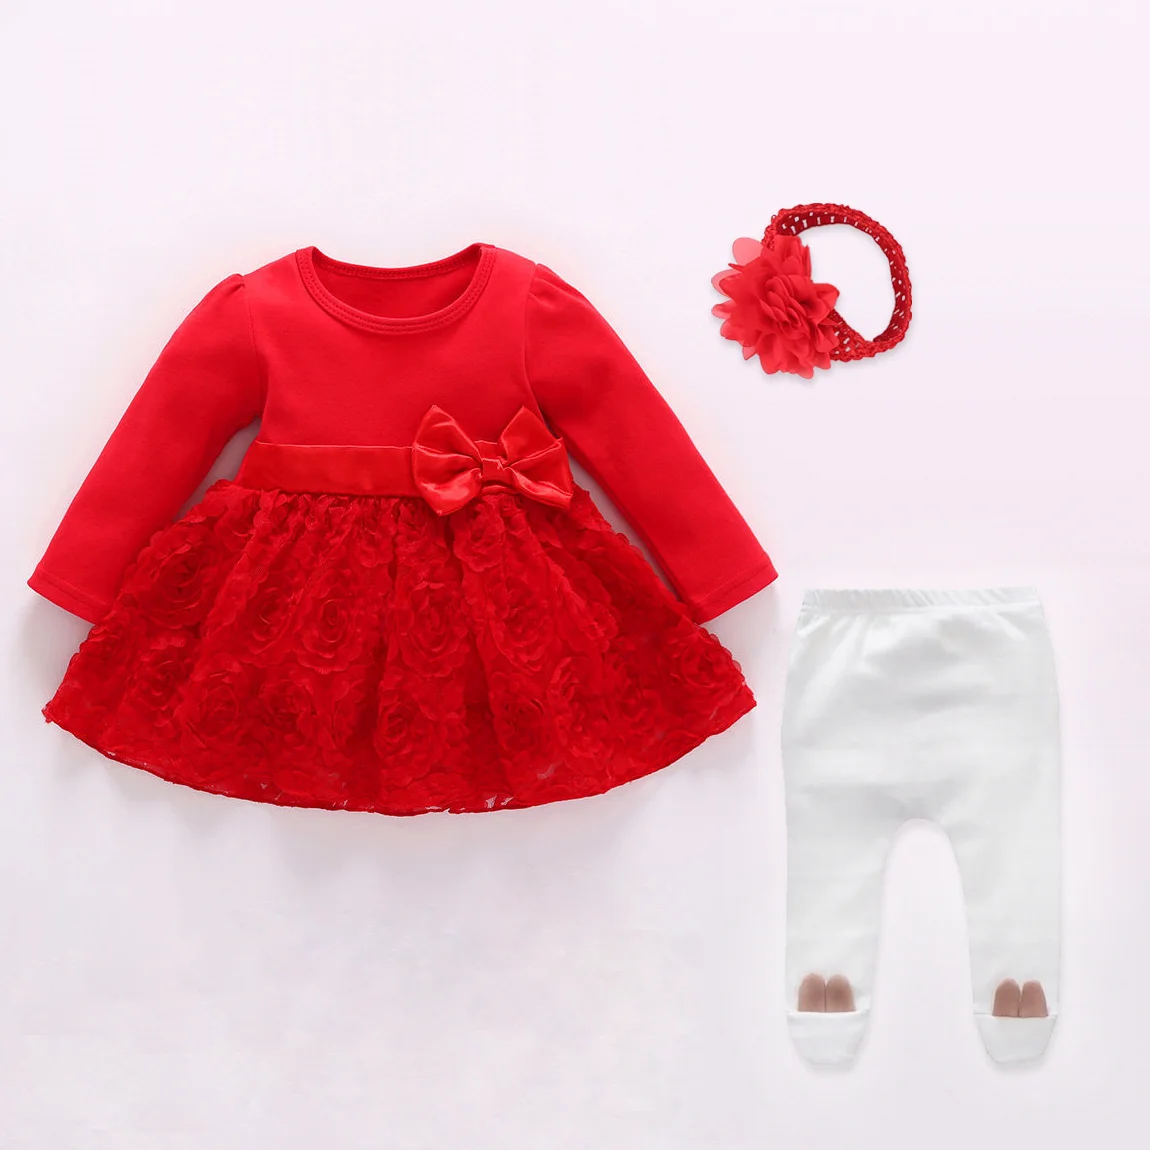 Baby Girls Infant Newborn Dress Foot Pants Autumn Wedding Party Birthday Outfits 0 3 Month dress headband Christening Gown